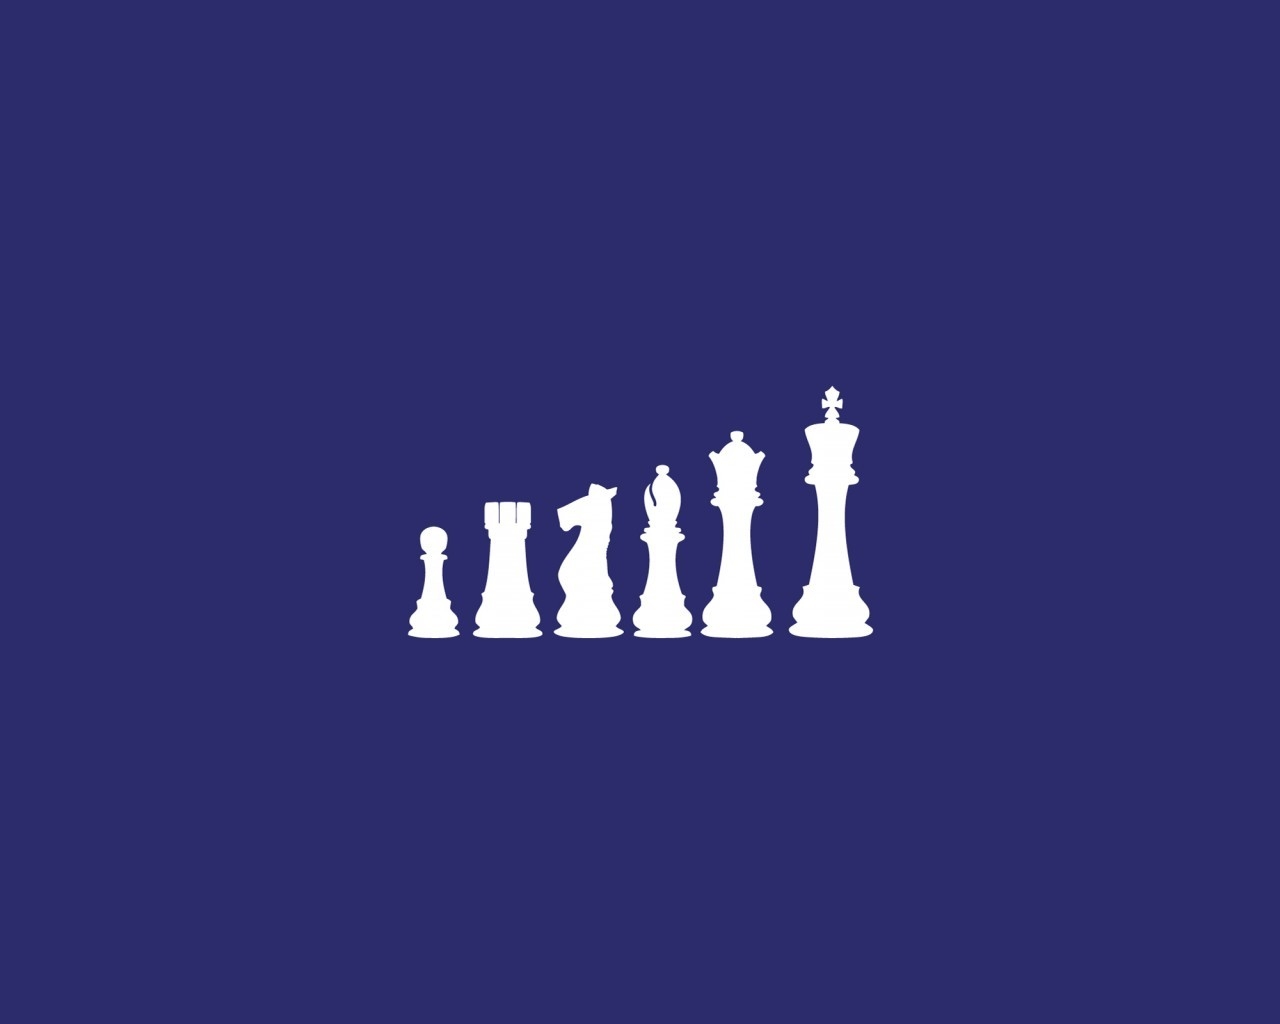 Chess Figures for 1280 x 1024 resolution